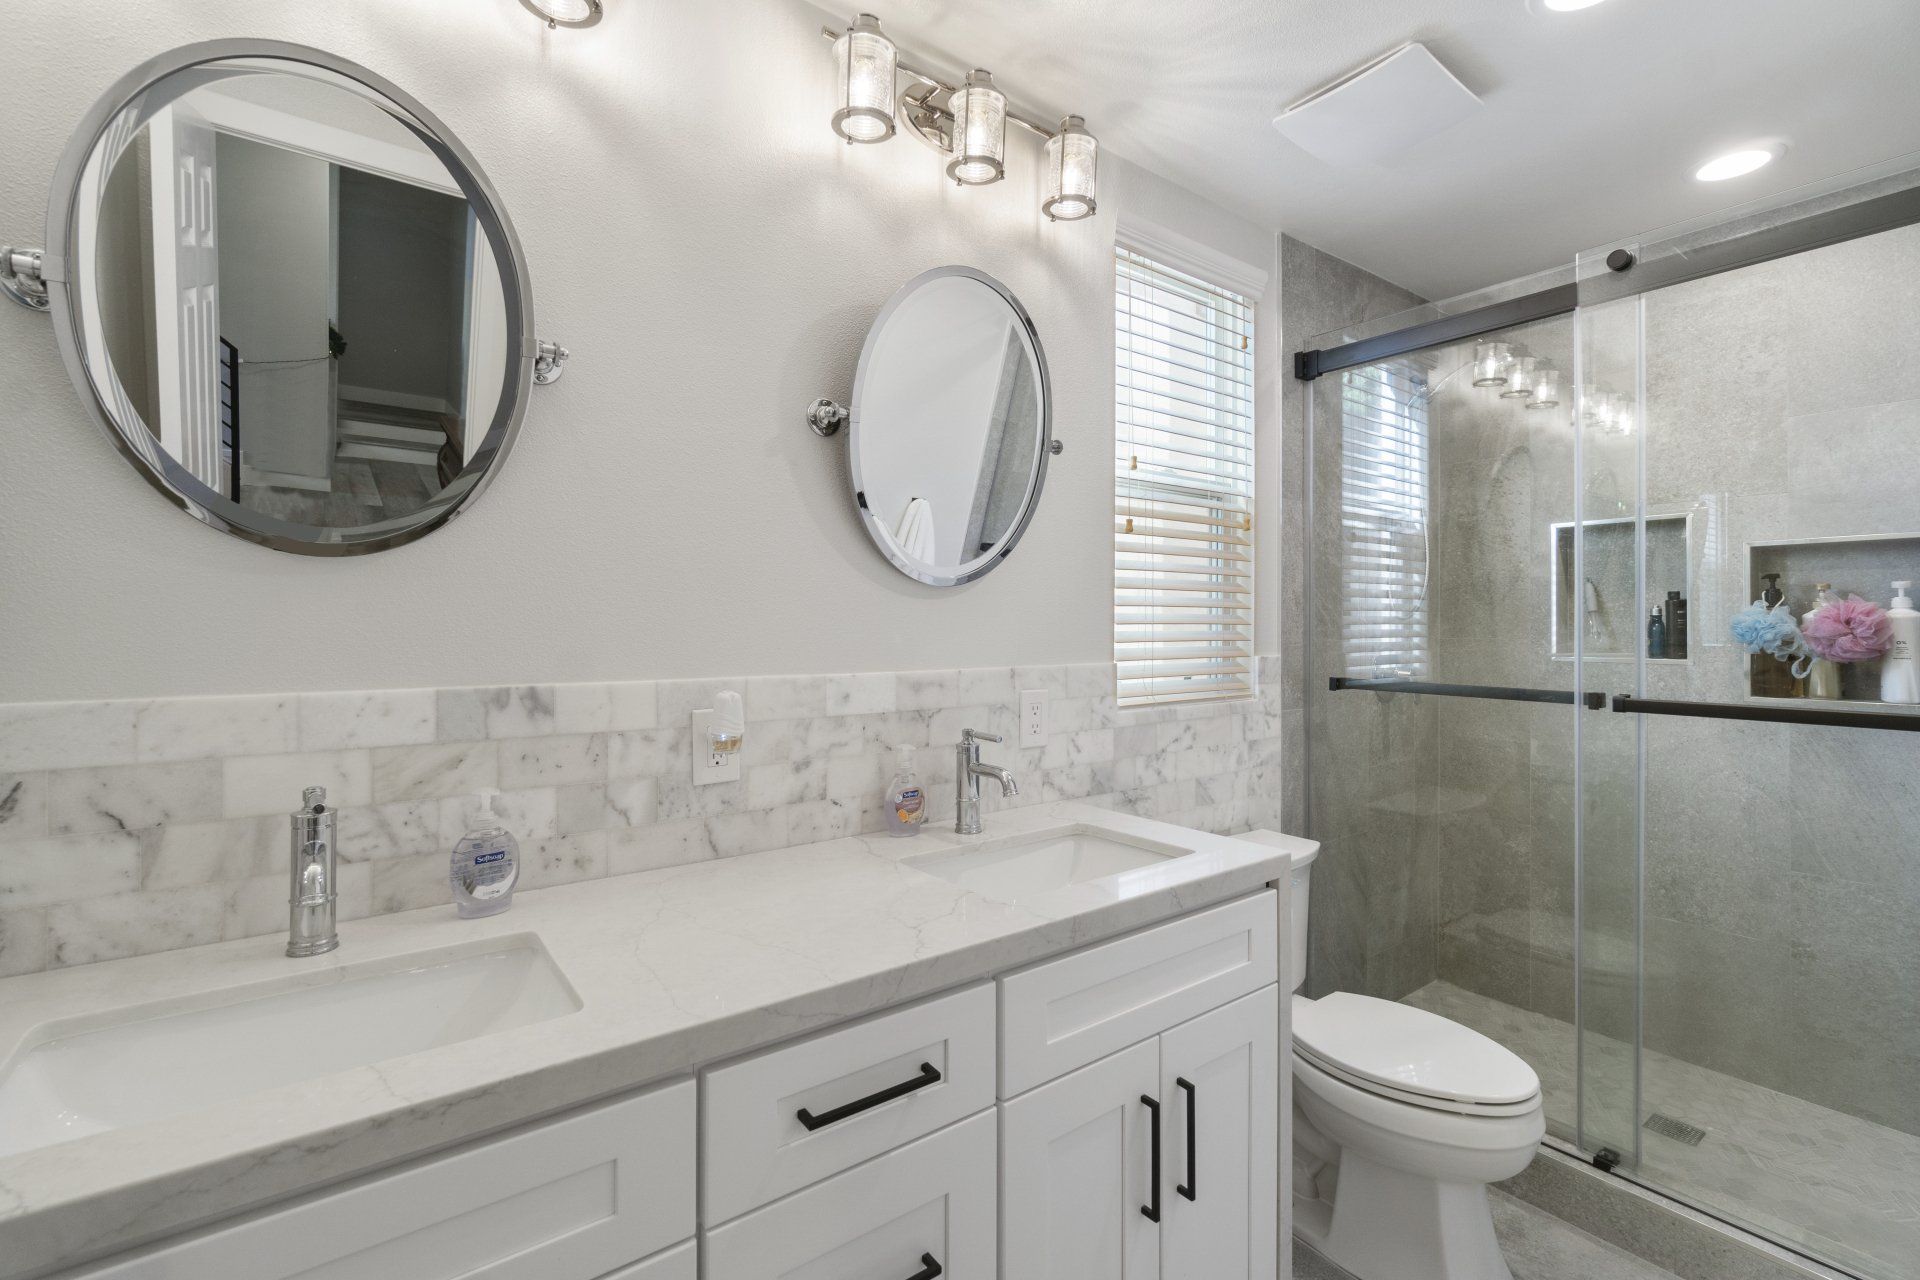 One of the best things about a three-quarter or 3/4 bath is smaller than Full bathrooms